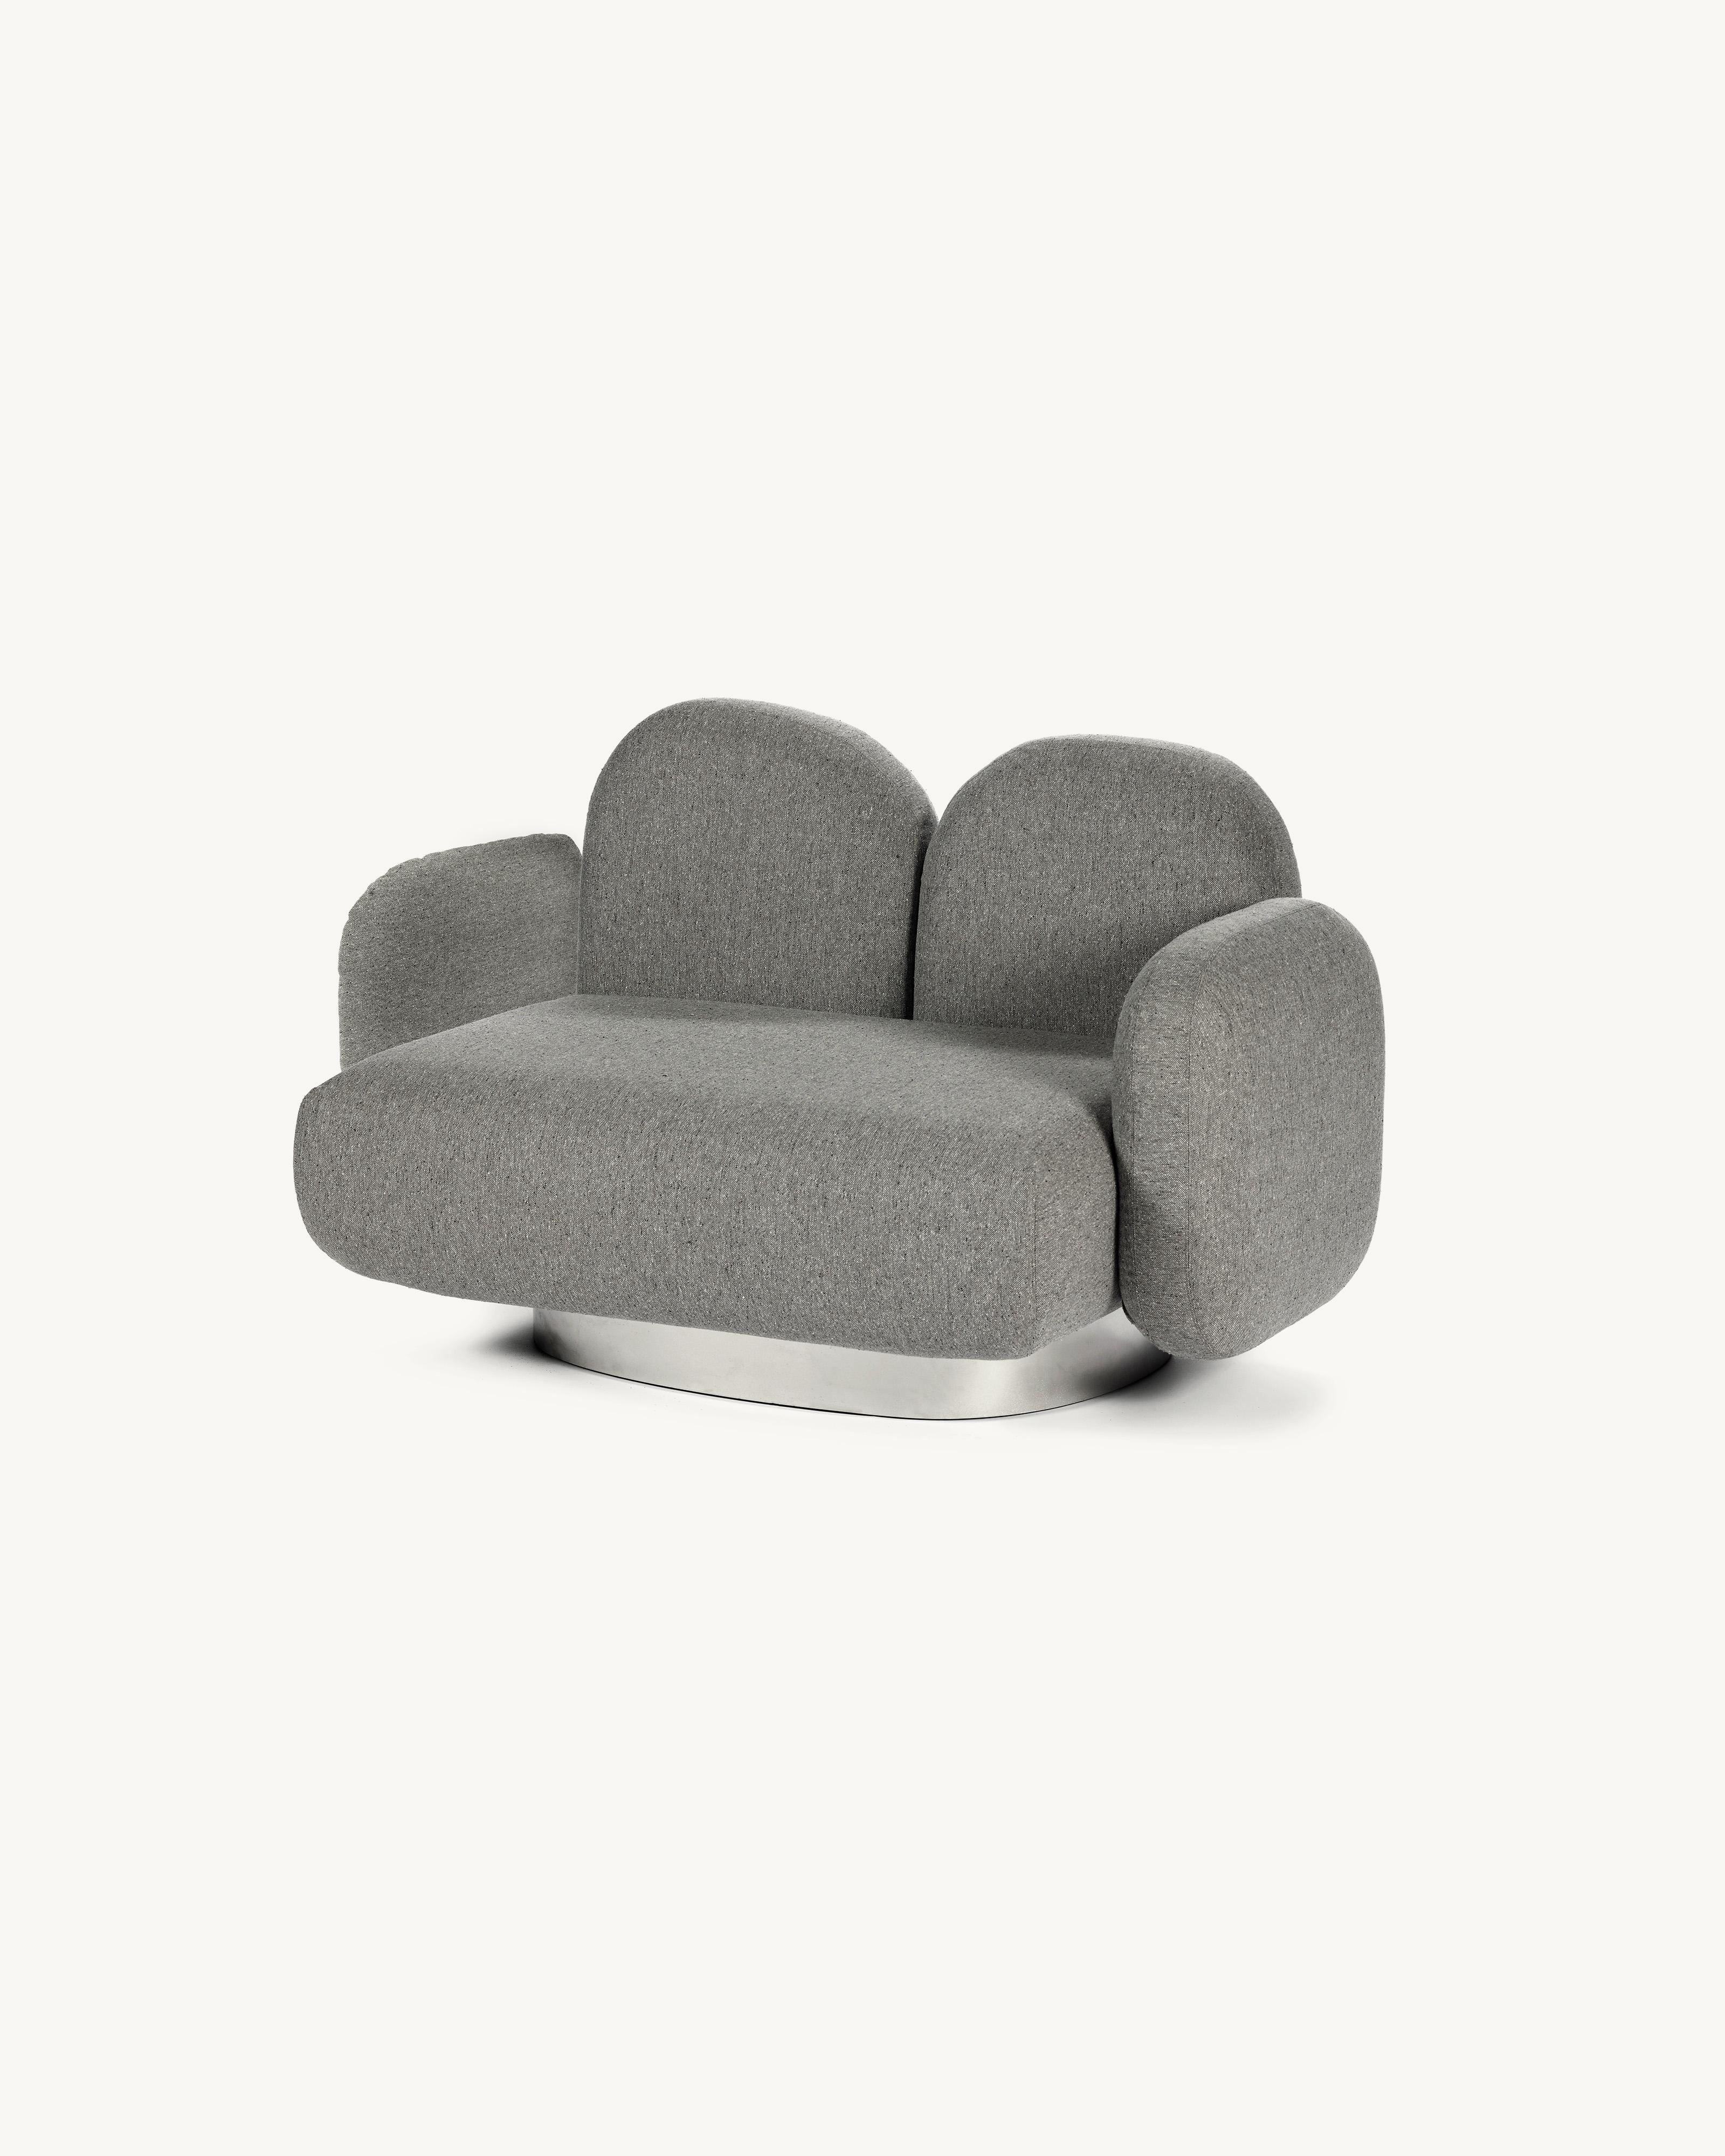 Contemporary Sofa 'Assemble' by Destroyers/Builders, 1 seater + 2 armrests For Sale 8